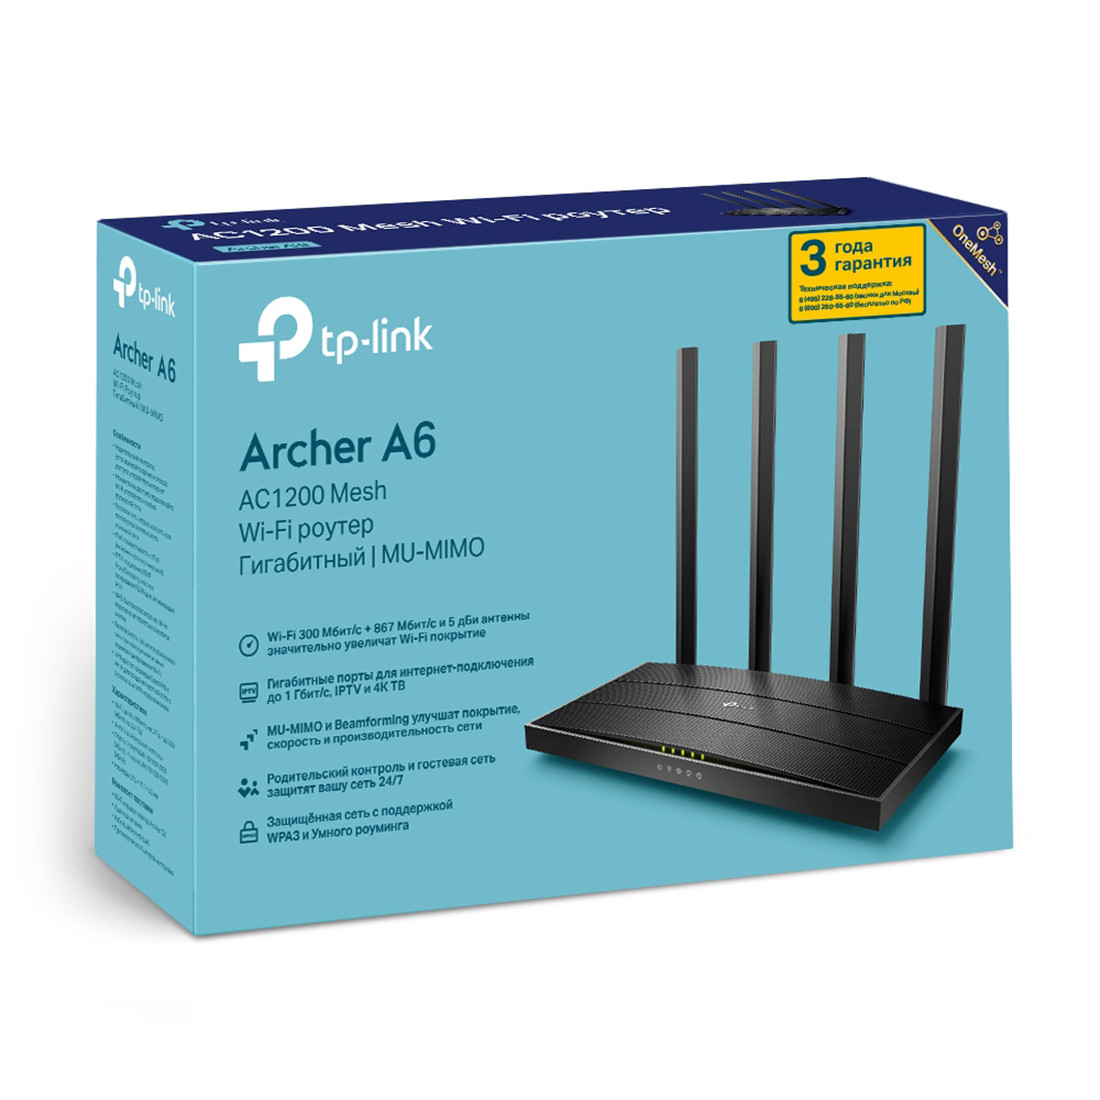 Маршрутизатор TP-Link Archer A6 - фото 3 - id-p89901978